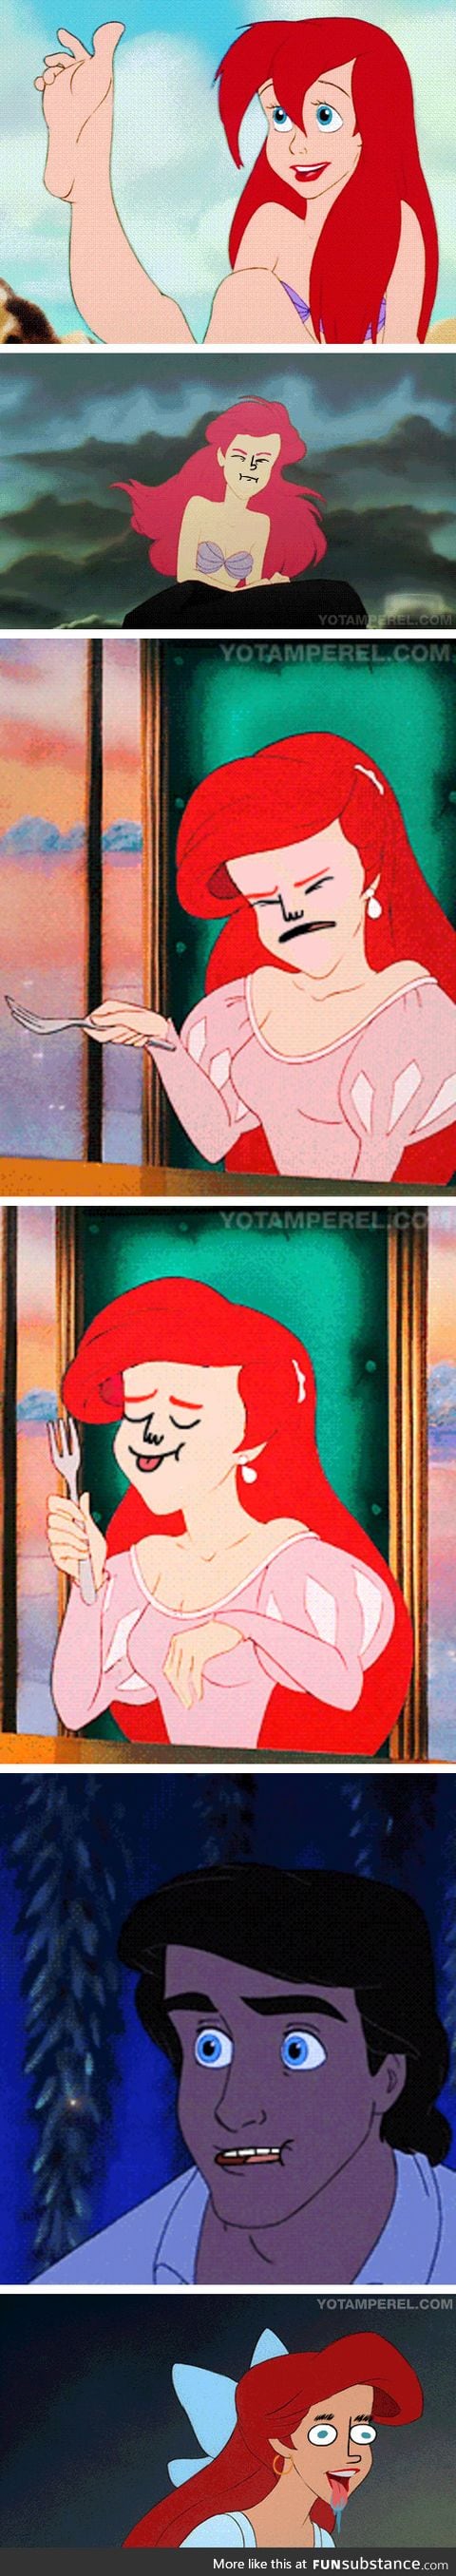 Ariel is special